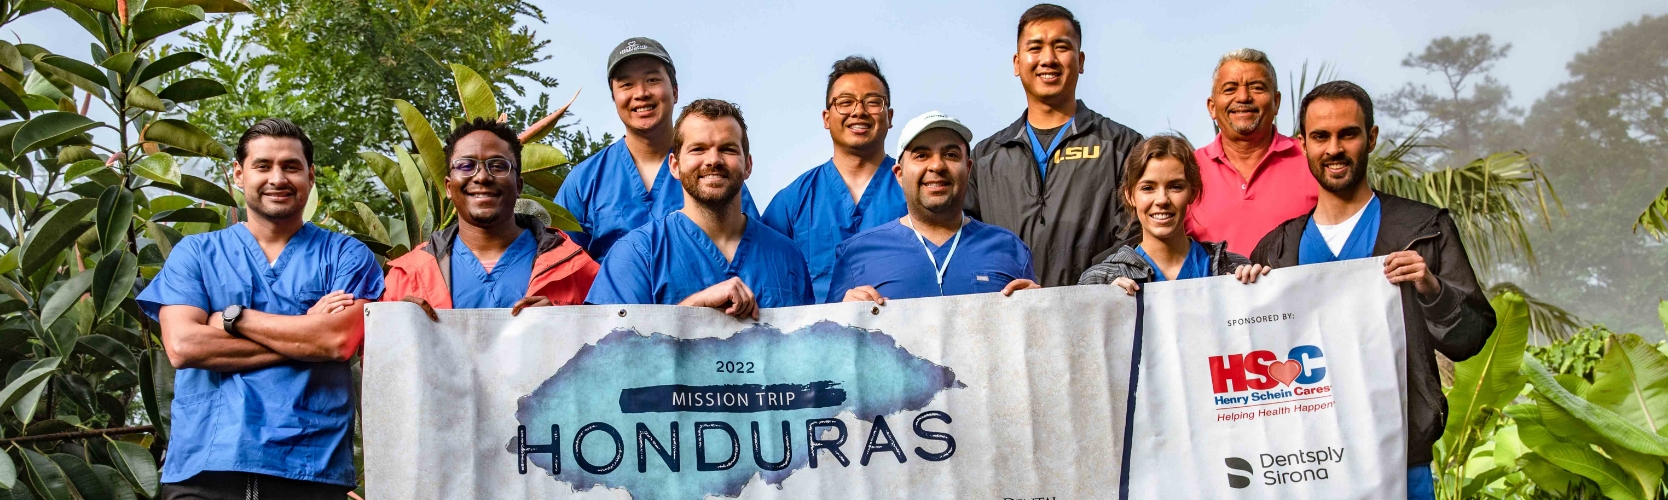 Heartland Supported doctors giving back during a mission trip to Honduras